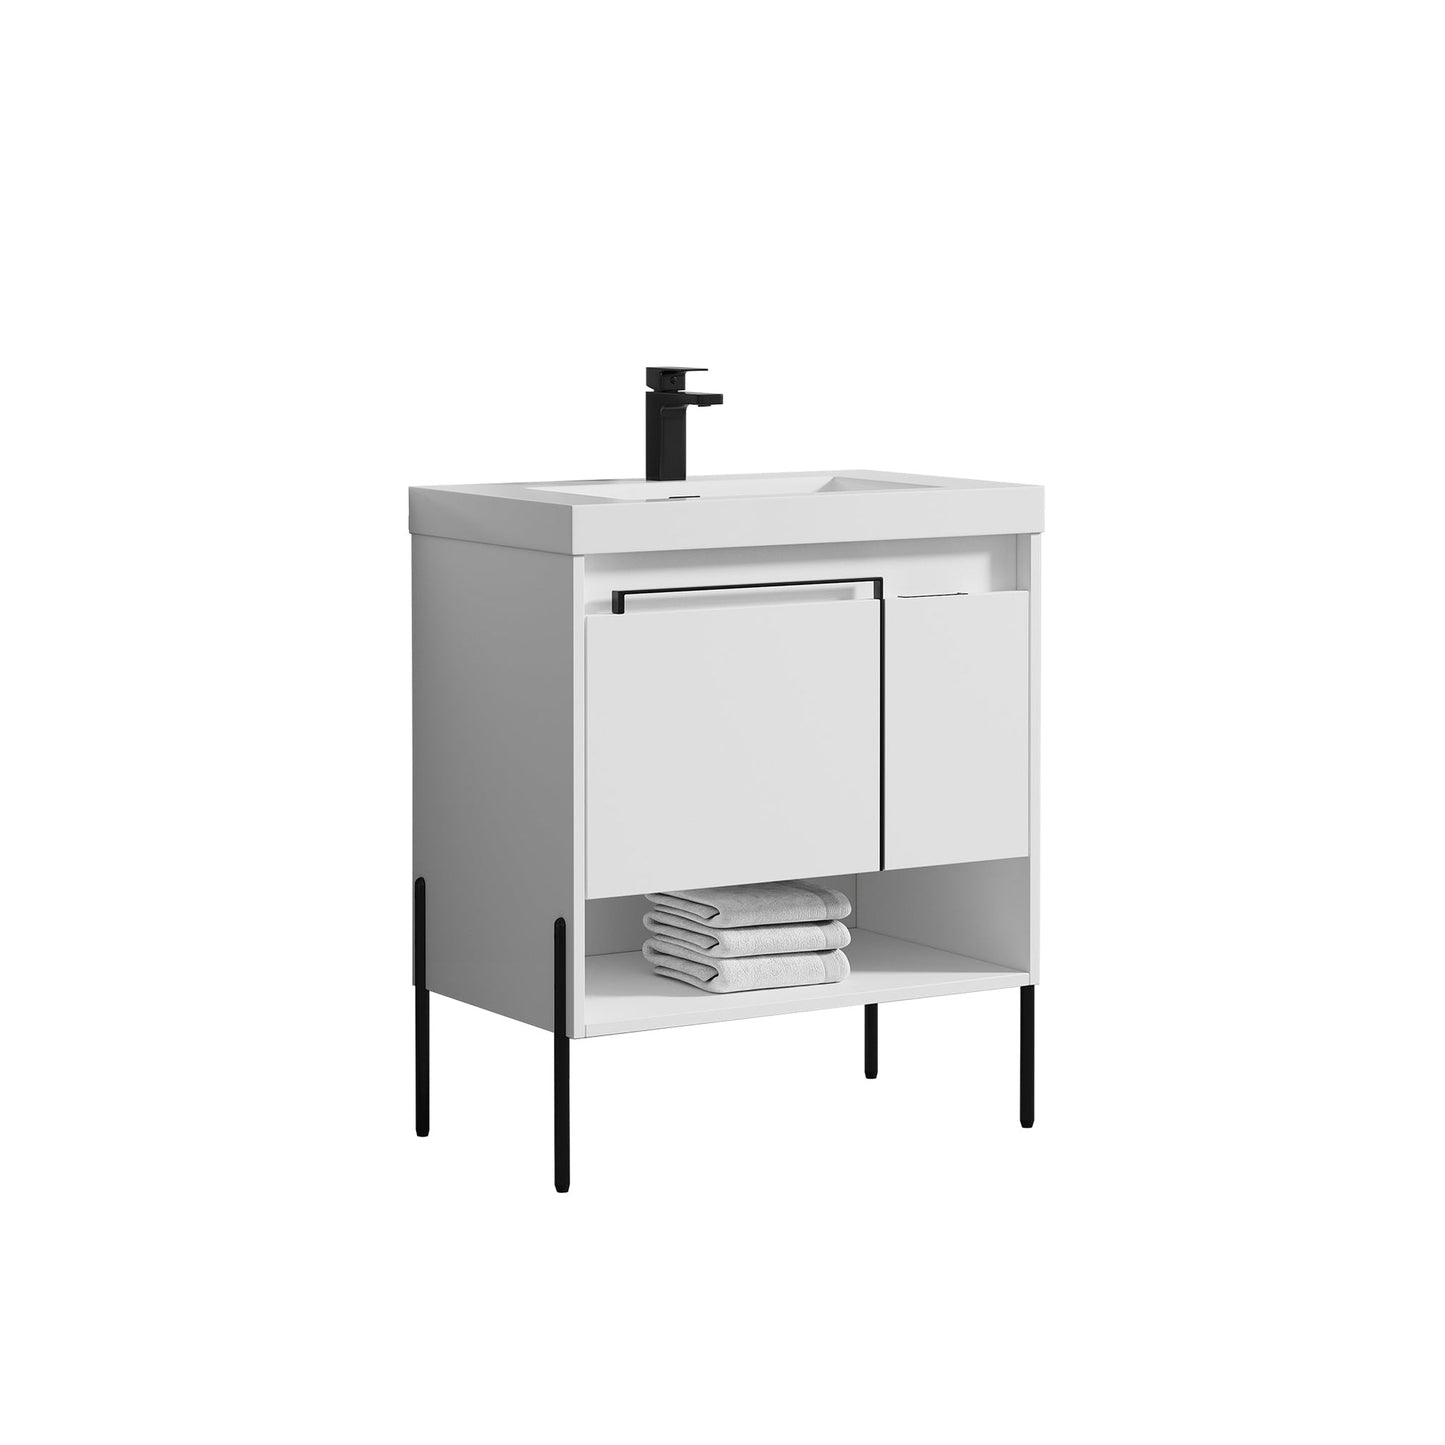 Blossom Turin 30" 1-Door 1-Drawer Matte White Freestanding Single Vanity Base With Open Shelf, Handle and Legs